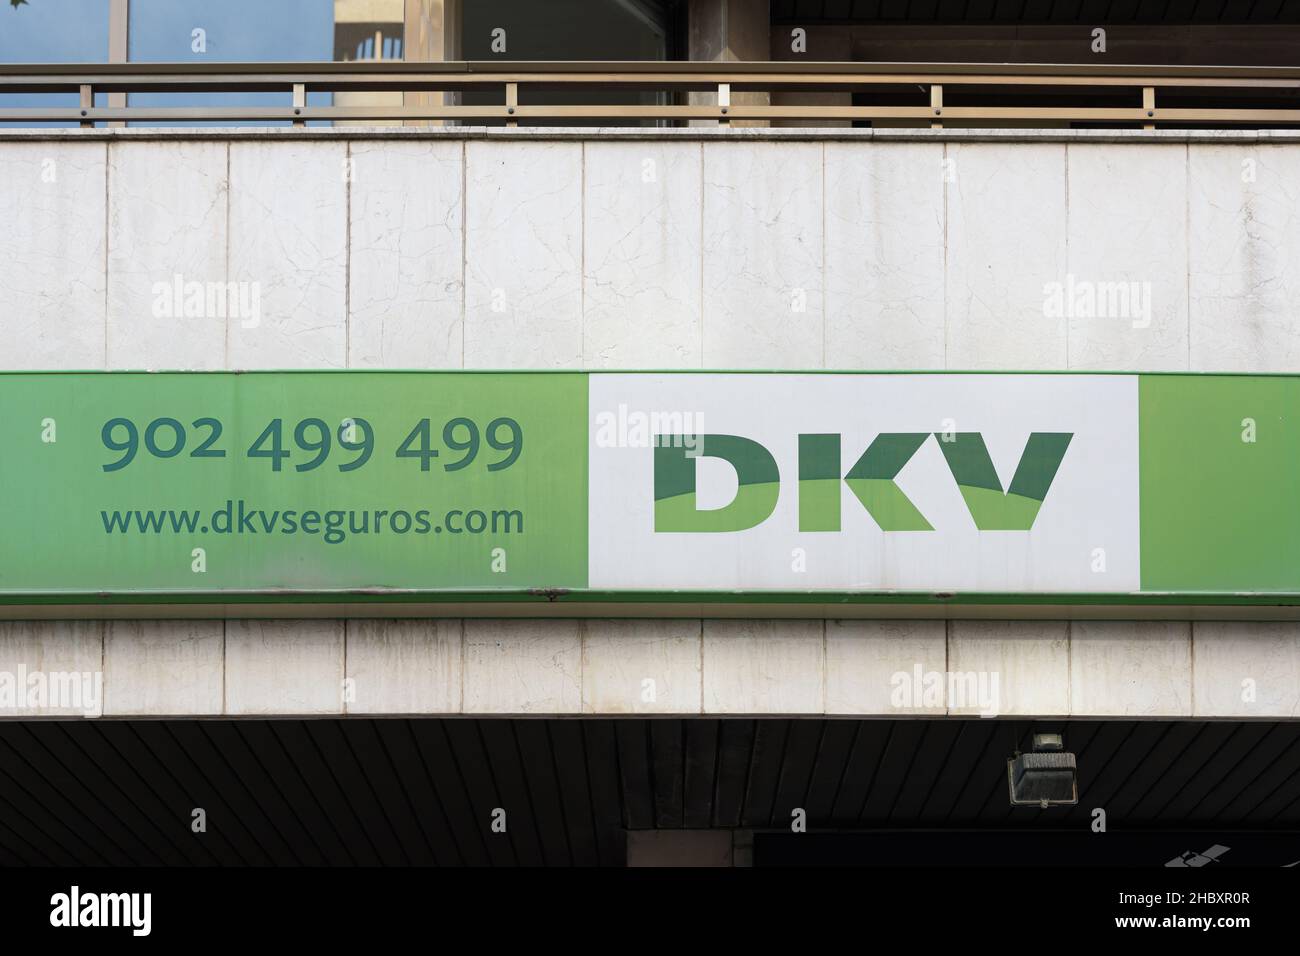 VALENCIA, SPAIN - DECEMBER 20, 2021: DKV belongs to ERGO Group, one of the largest insurance groups in Europe Stock Photo